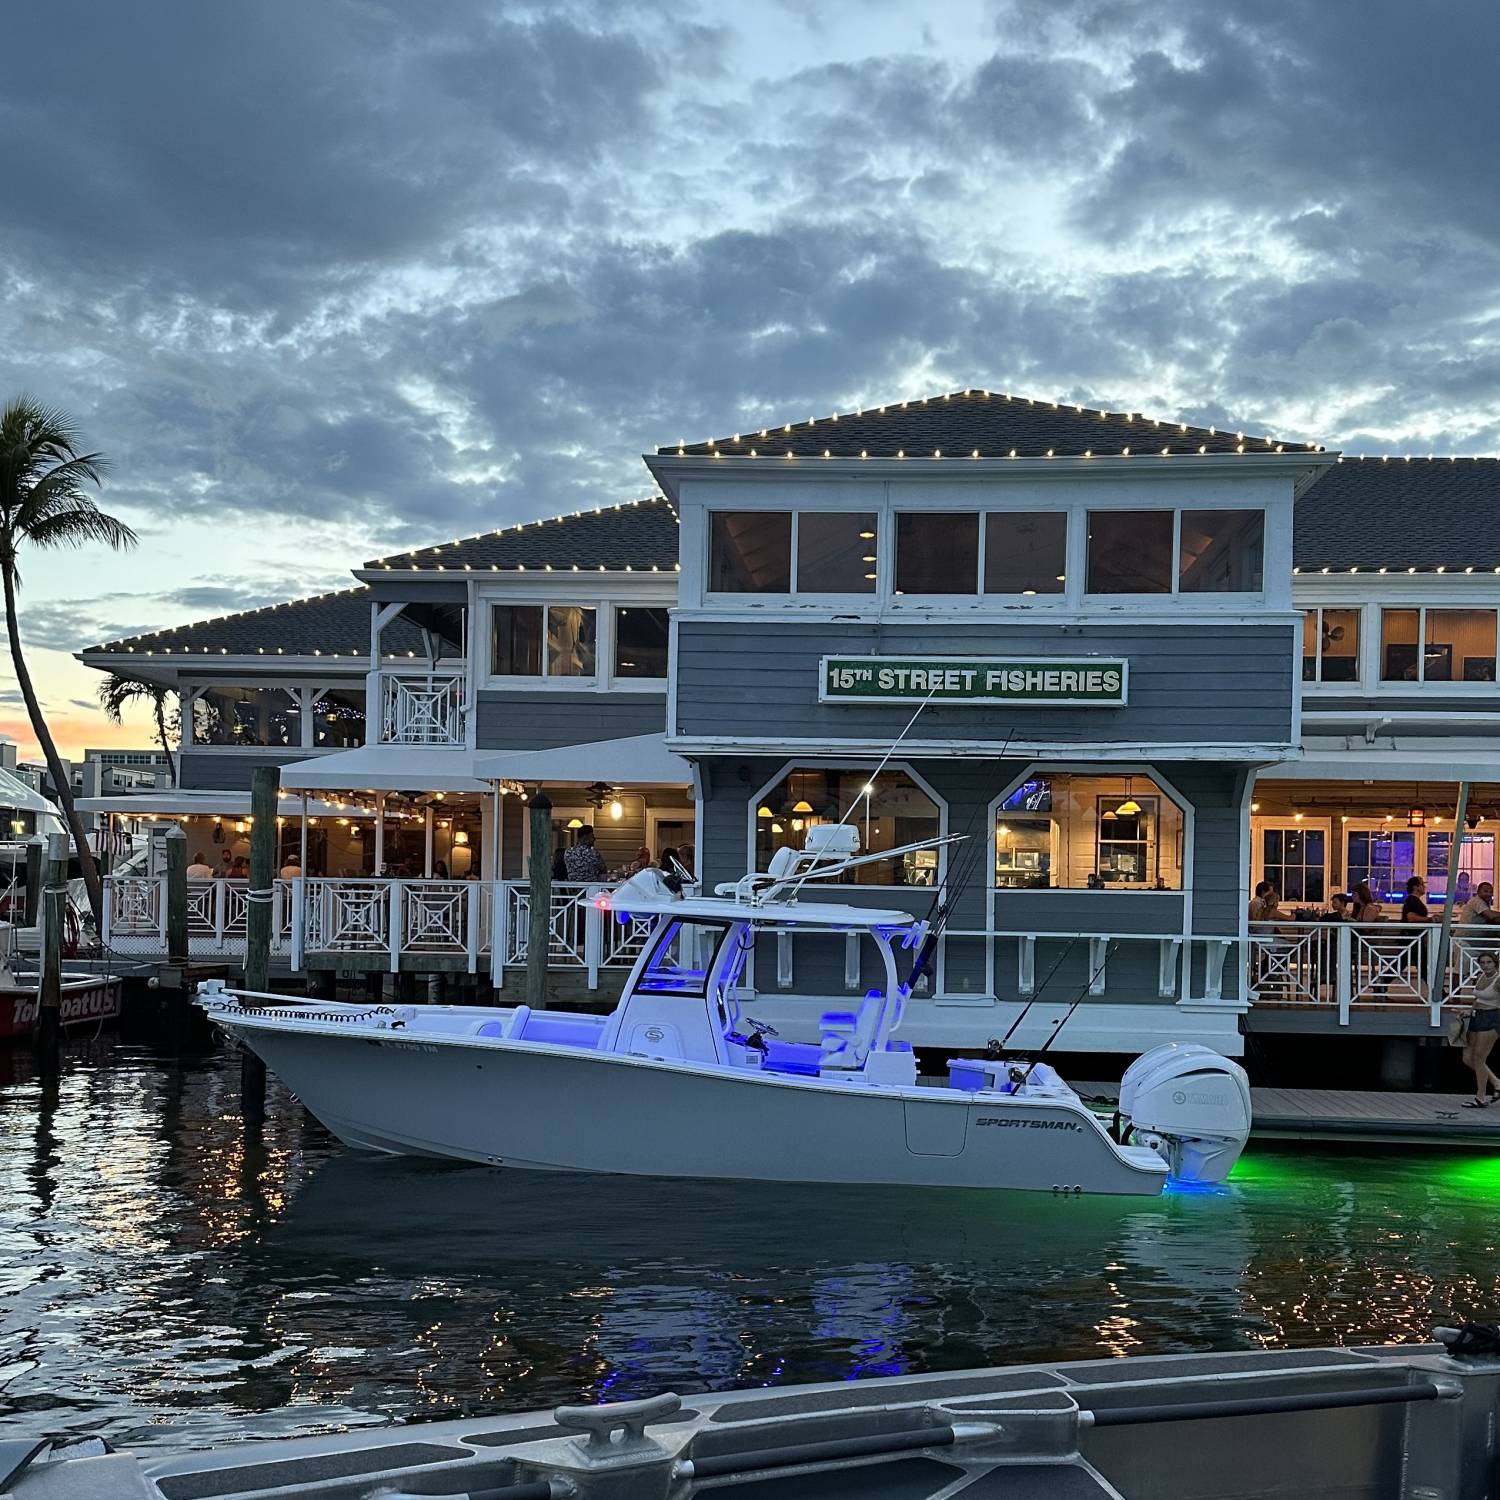 Title: Dinner on the water - On board their Sportsman Open 282 Center Console - Location: Ft Lauderdale, FL. Participating in the Photo Contest #SportsmanJune2023